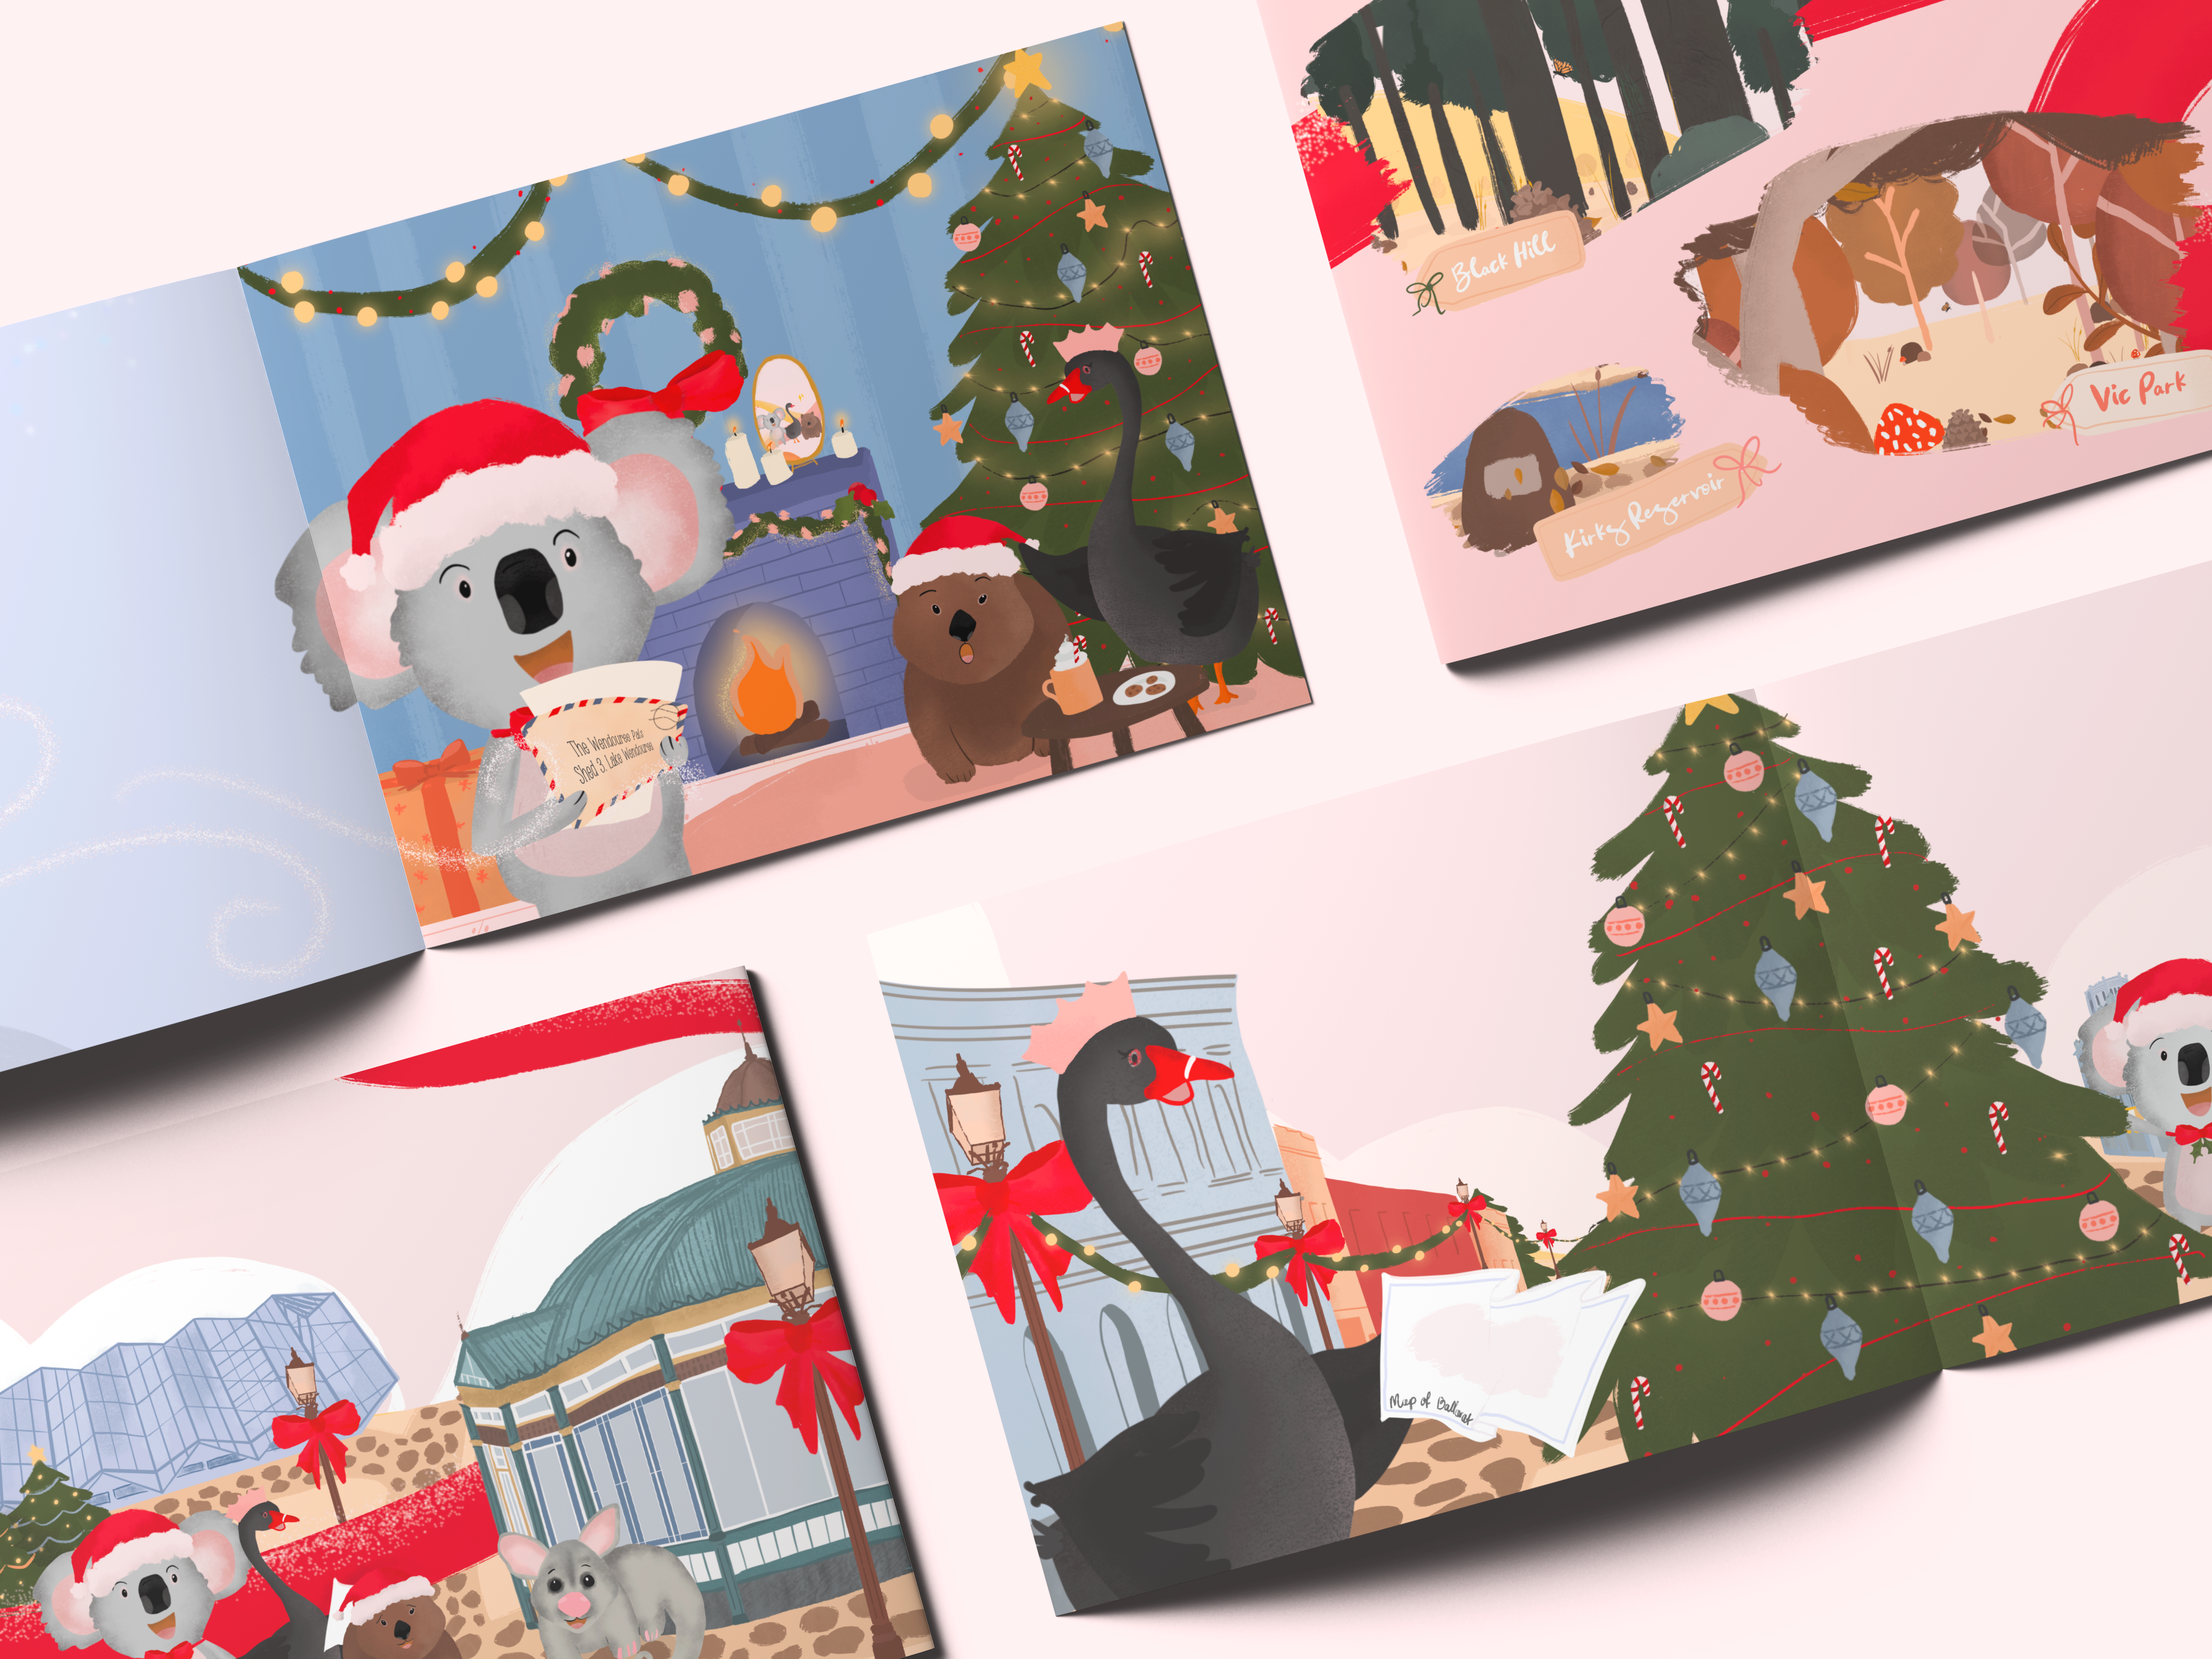 Image of four book spreads open onto illustrated scenes from the 'Christmas in Ballarat' children's book by Liv Lorkin, featuring Christmas-inspired illustrations with tones of green, red, and blue. The scenes show Miss Eccles, Lynnie, and Herbert going on adventures in each page.